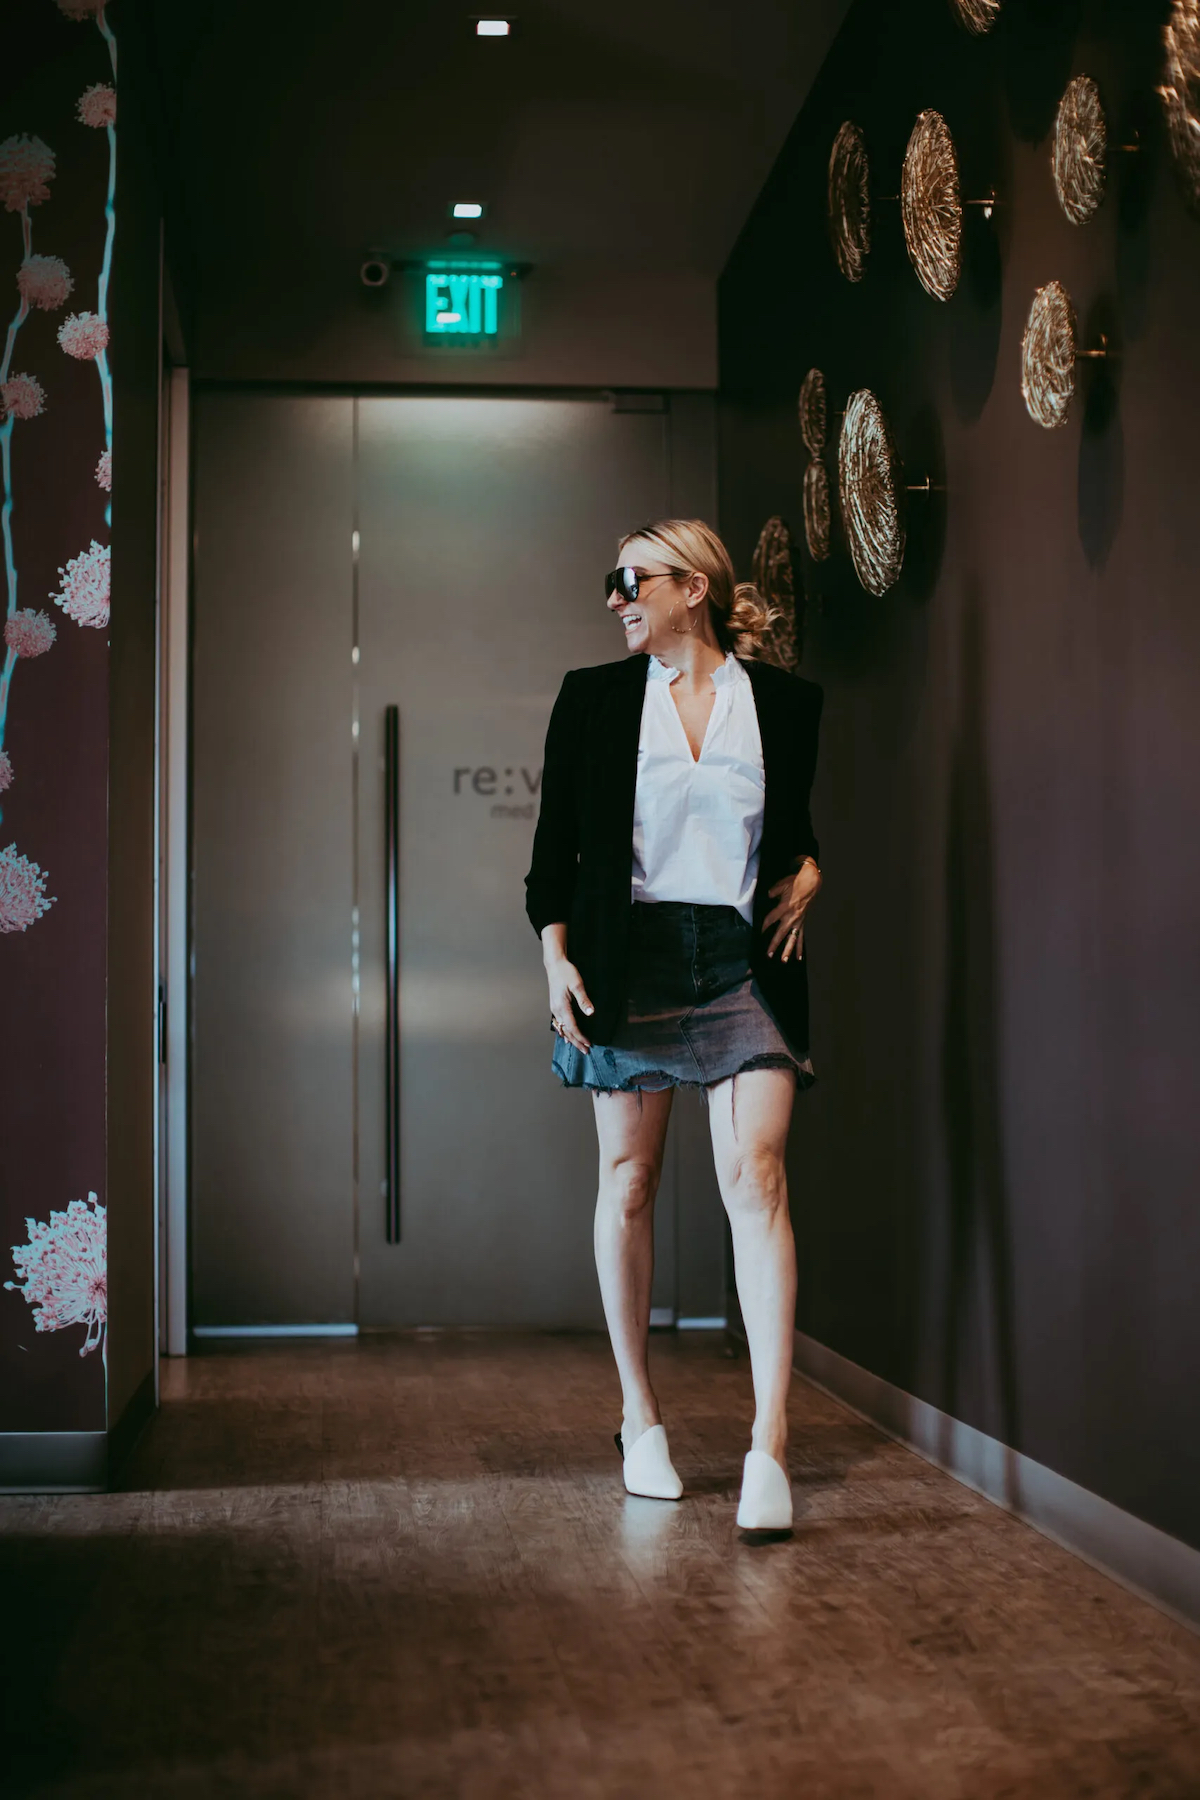 A blonde woman walks through a dark hallway of a medical spa with her sunglasses on.